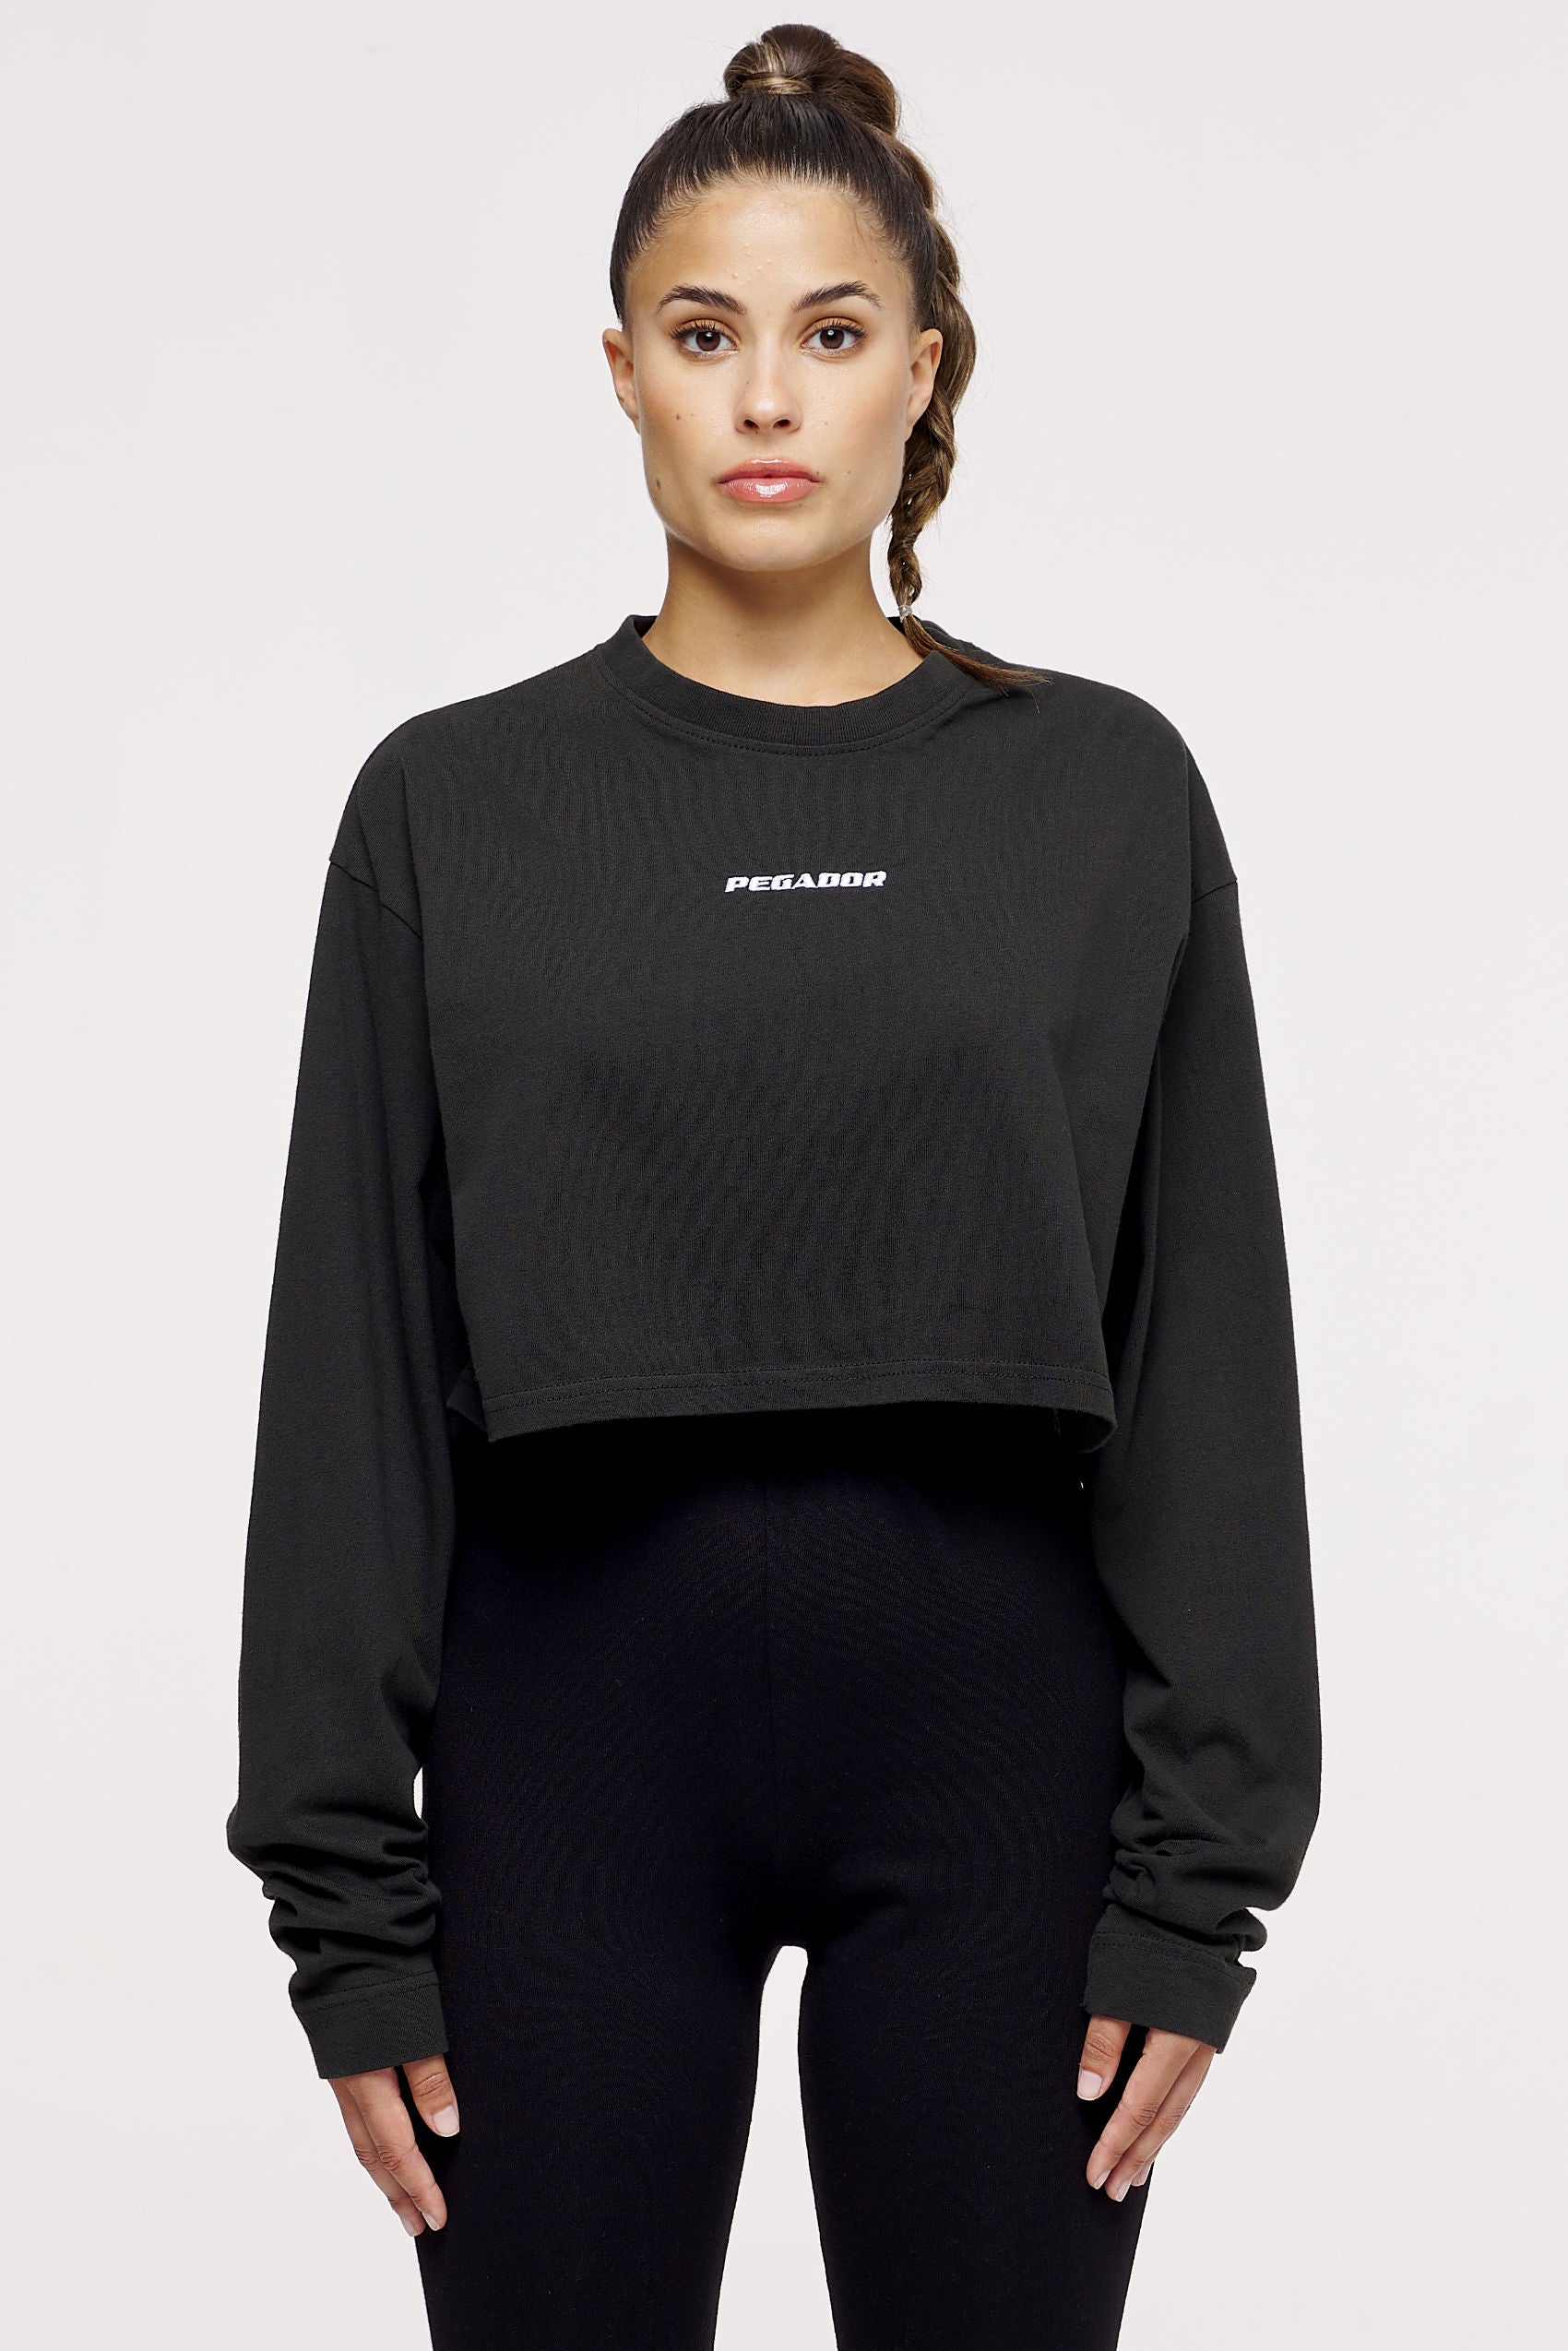 Lucy Cropped Long Sleeve Washed Phantom Black Tees | Women No Role Model Female 